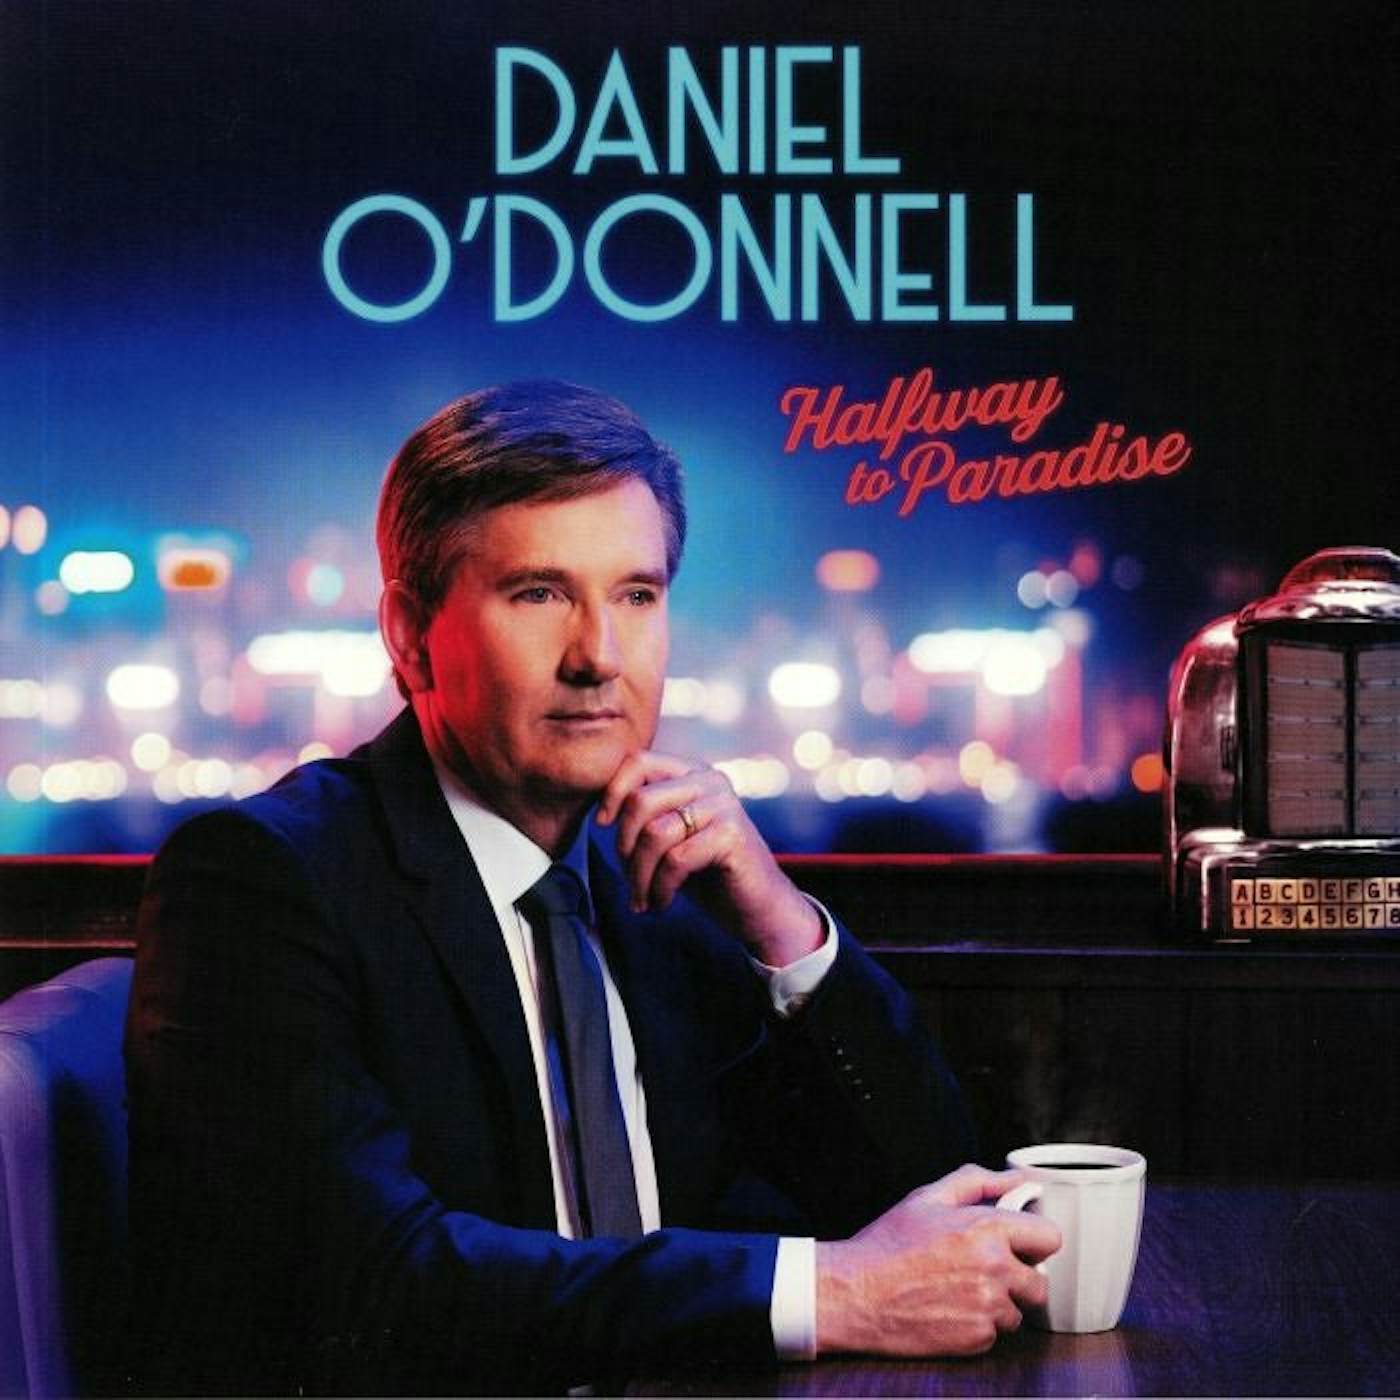 Daniel O'donnell LP Vinyl Record - Halfway To Paradise